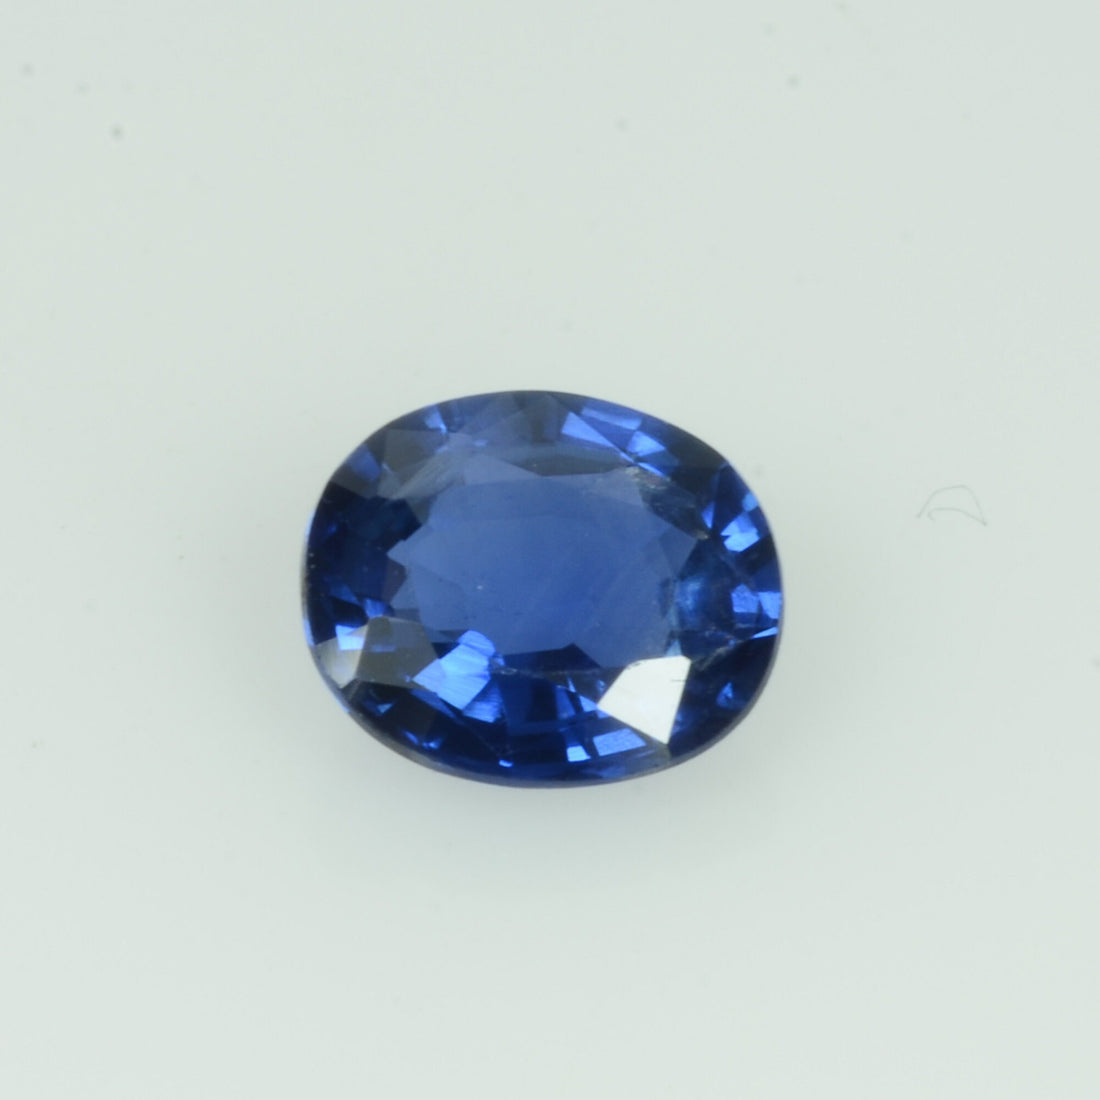 0.63 cts natural blue sapphire loose gemstone Oval cut